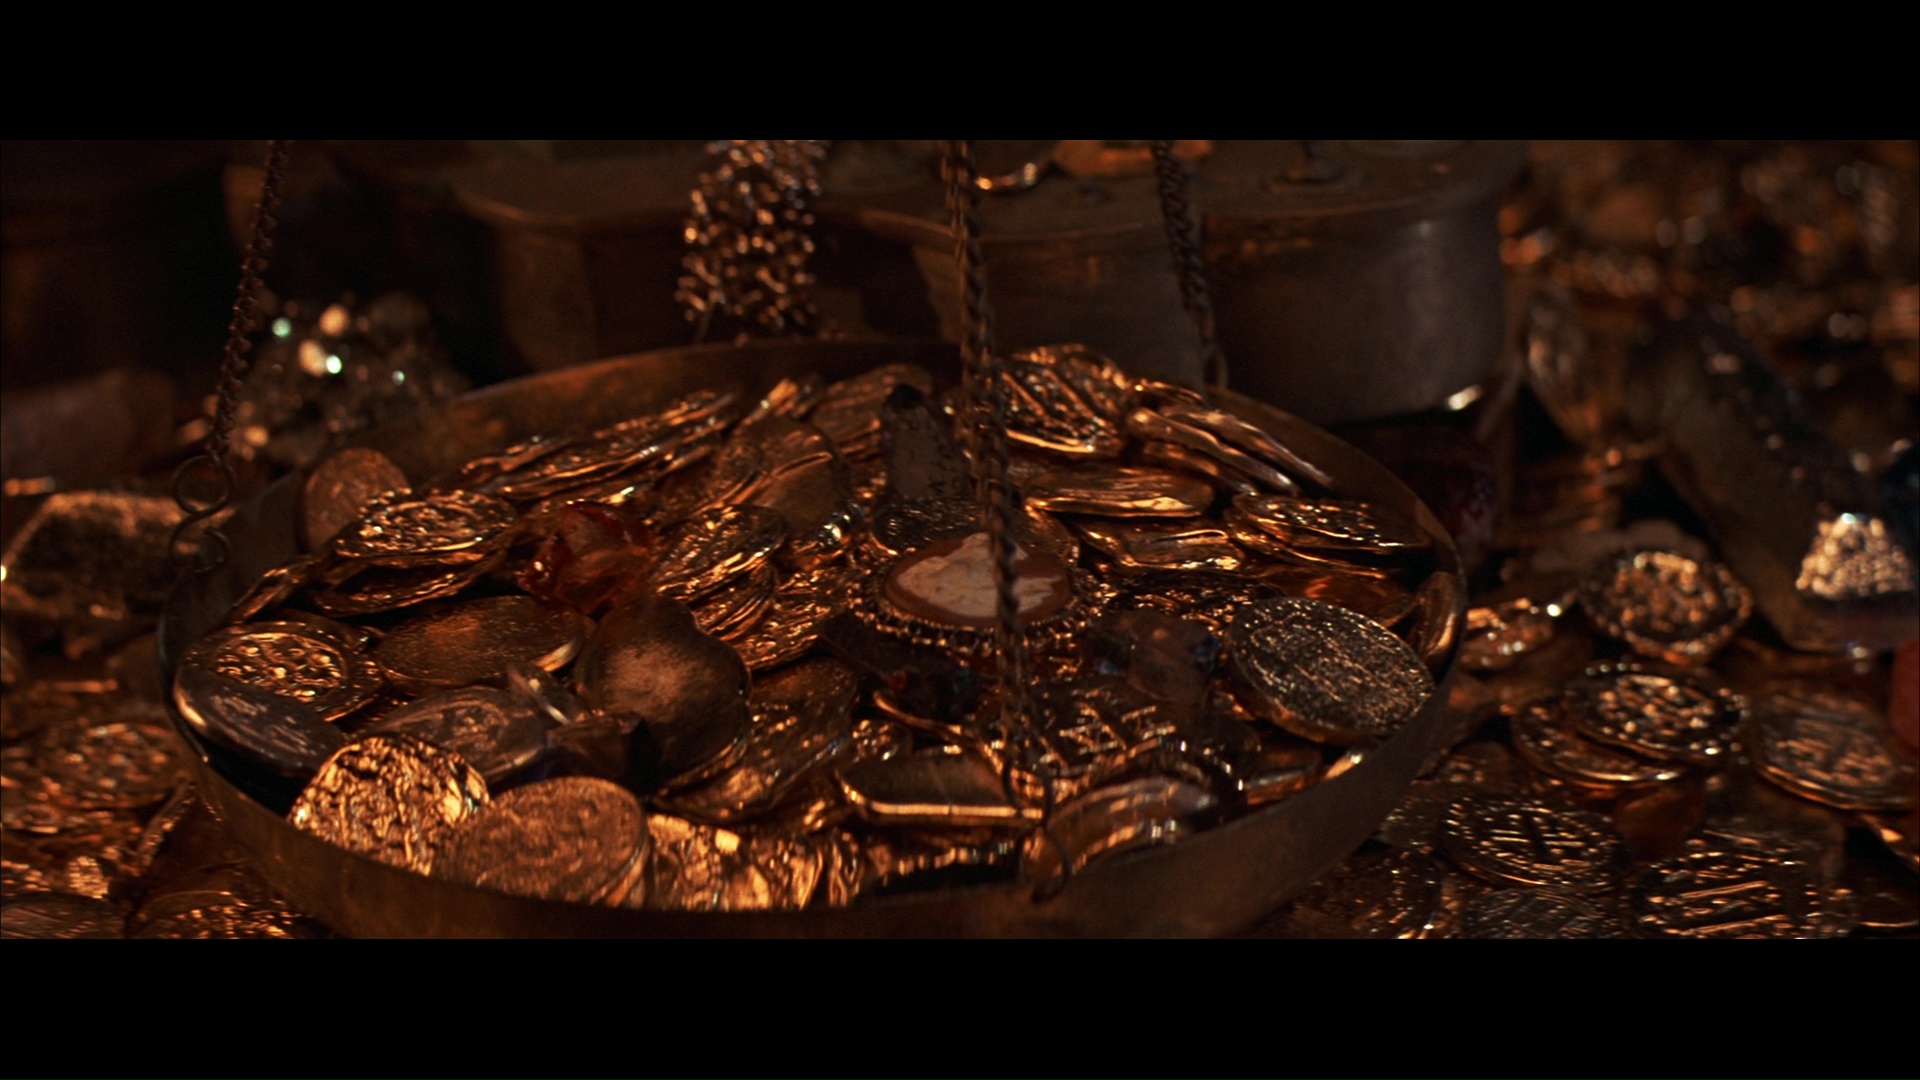 THE GOONIES (1985) - Assorted One-Eyed Willy's Treasure - Image 10 of 11